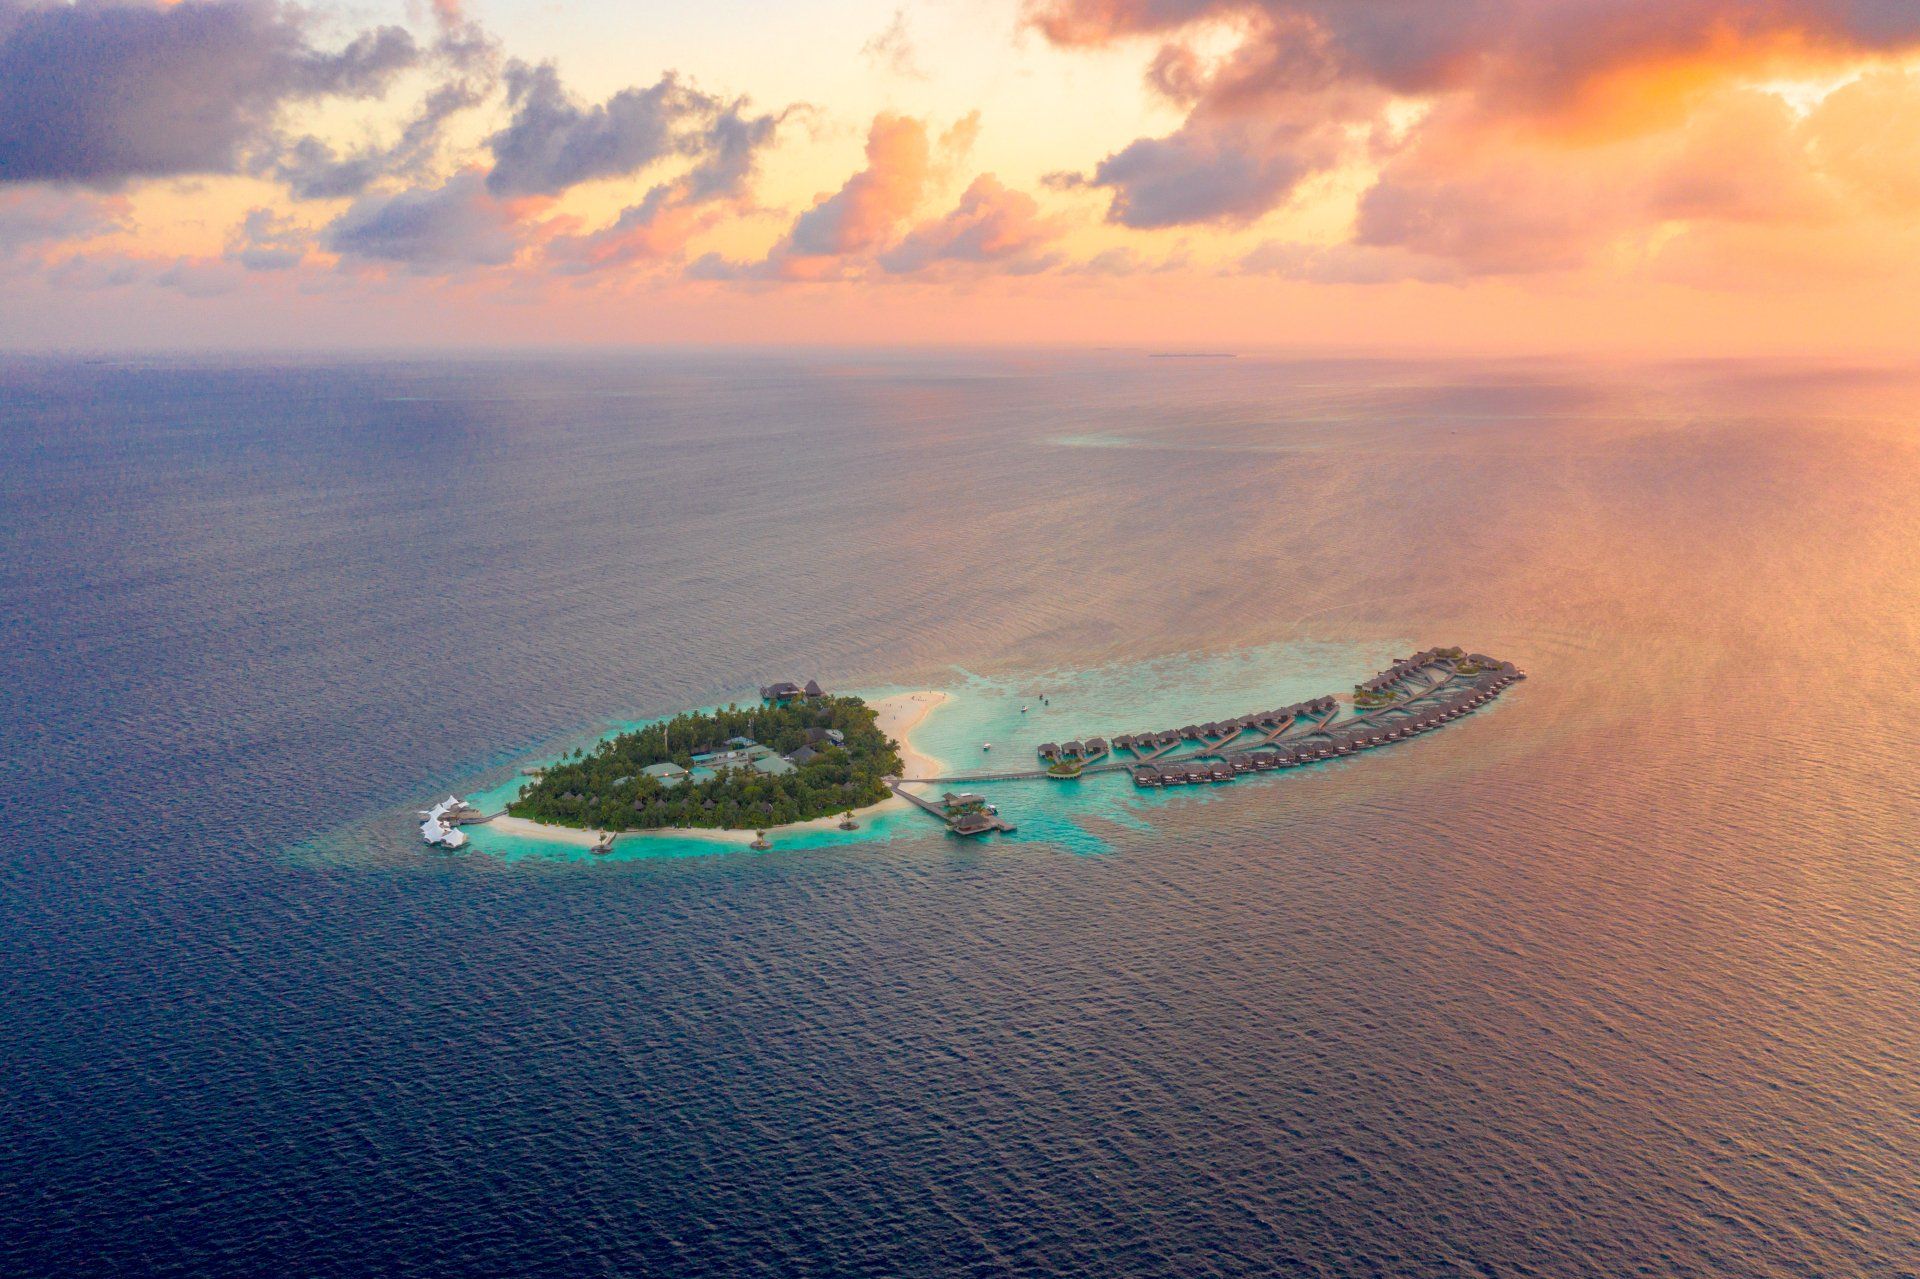 An aerial view of a small island in the middle of the ocean at sunset.